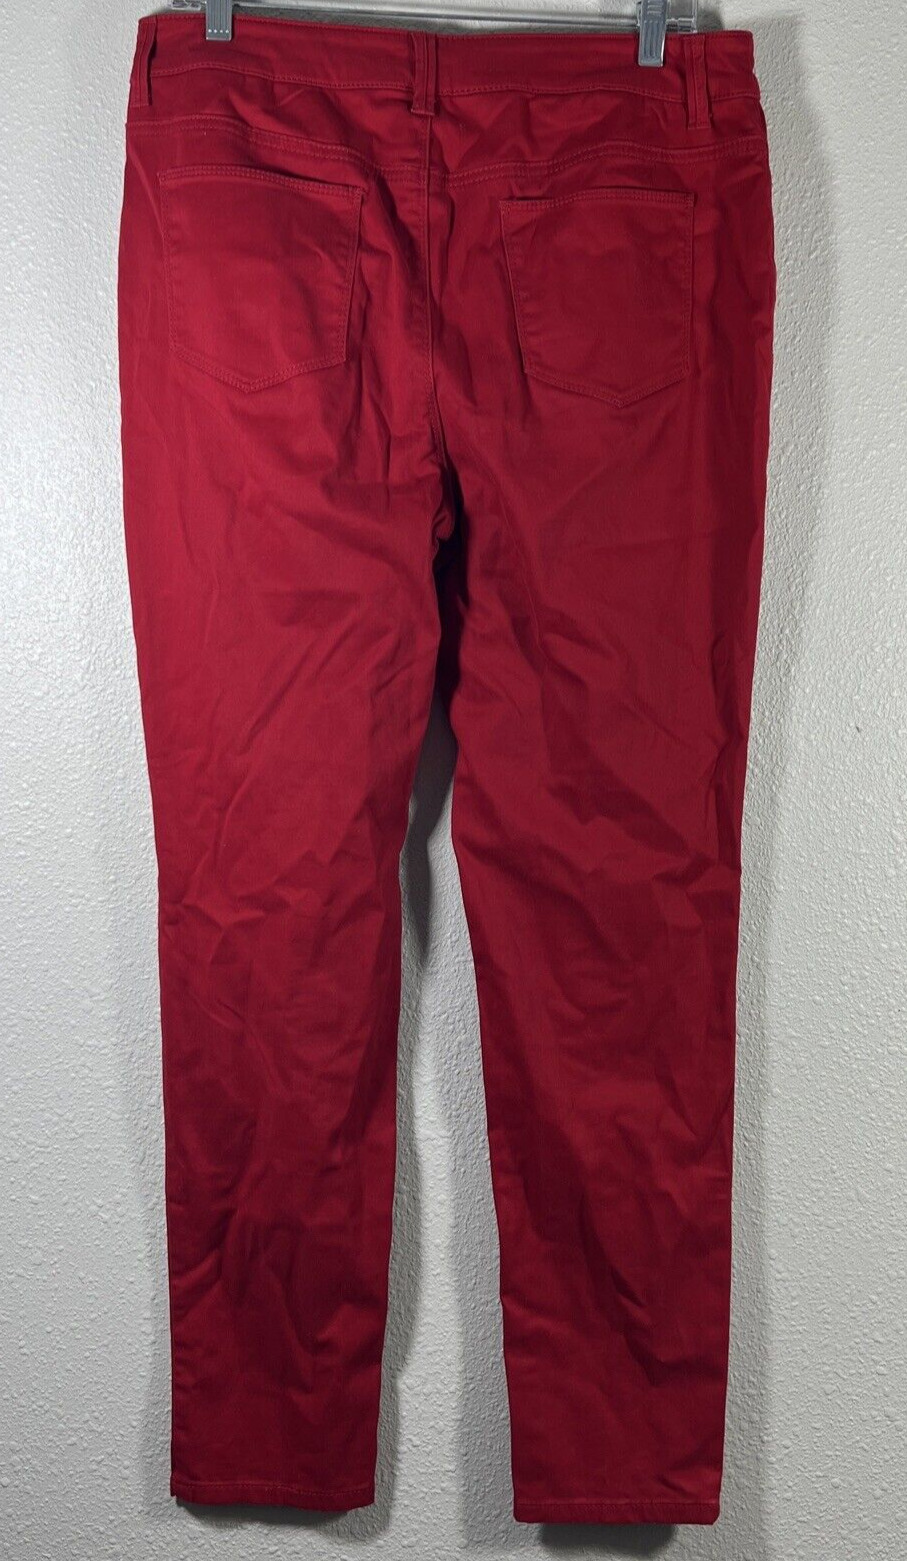 The Platinum Jegging by Chicos Red Pants Size 1.5… - image 5